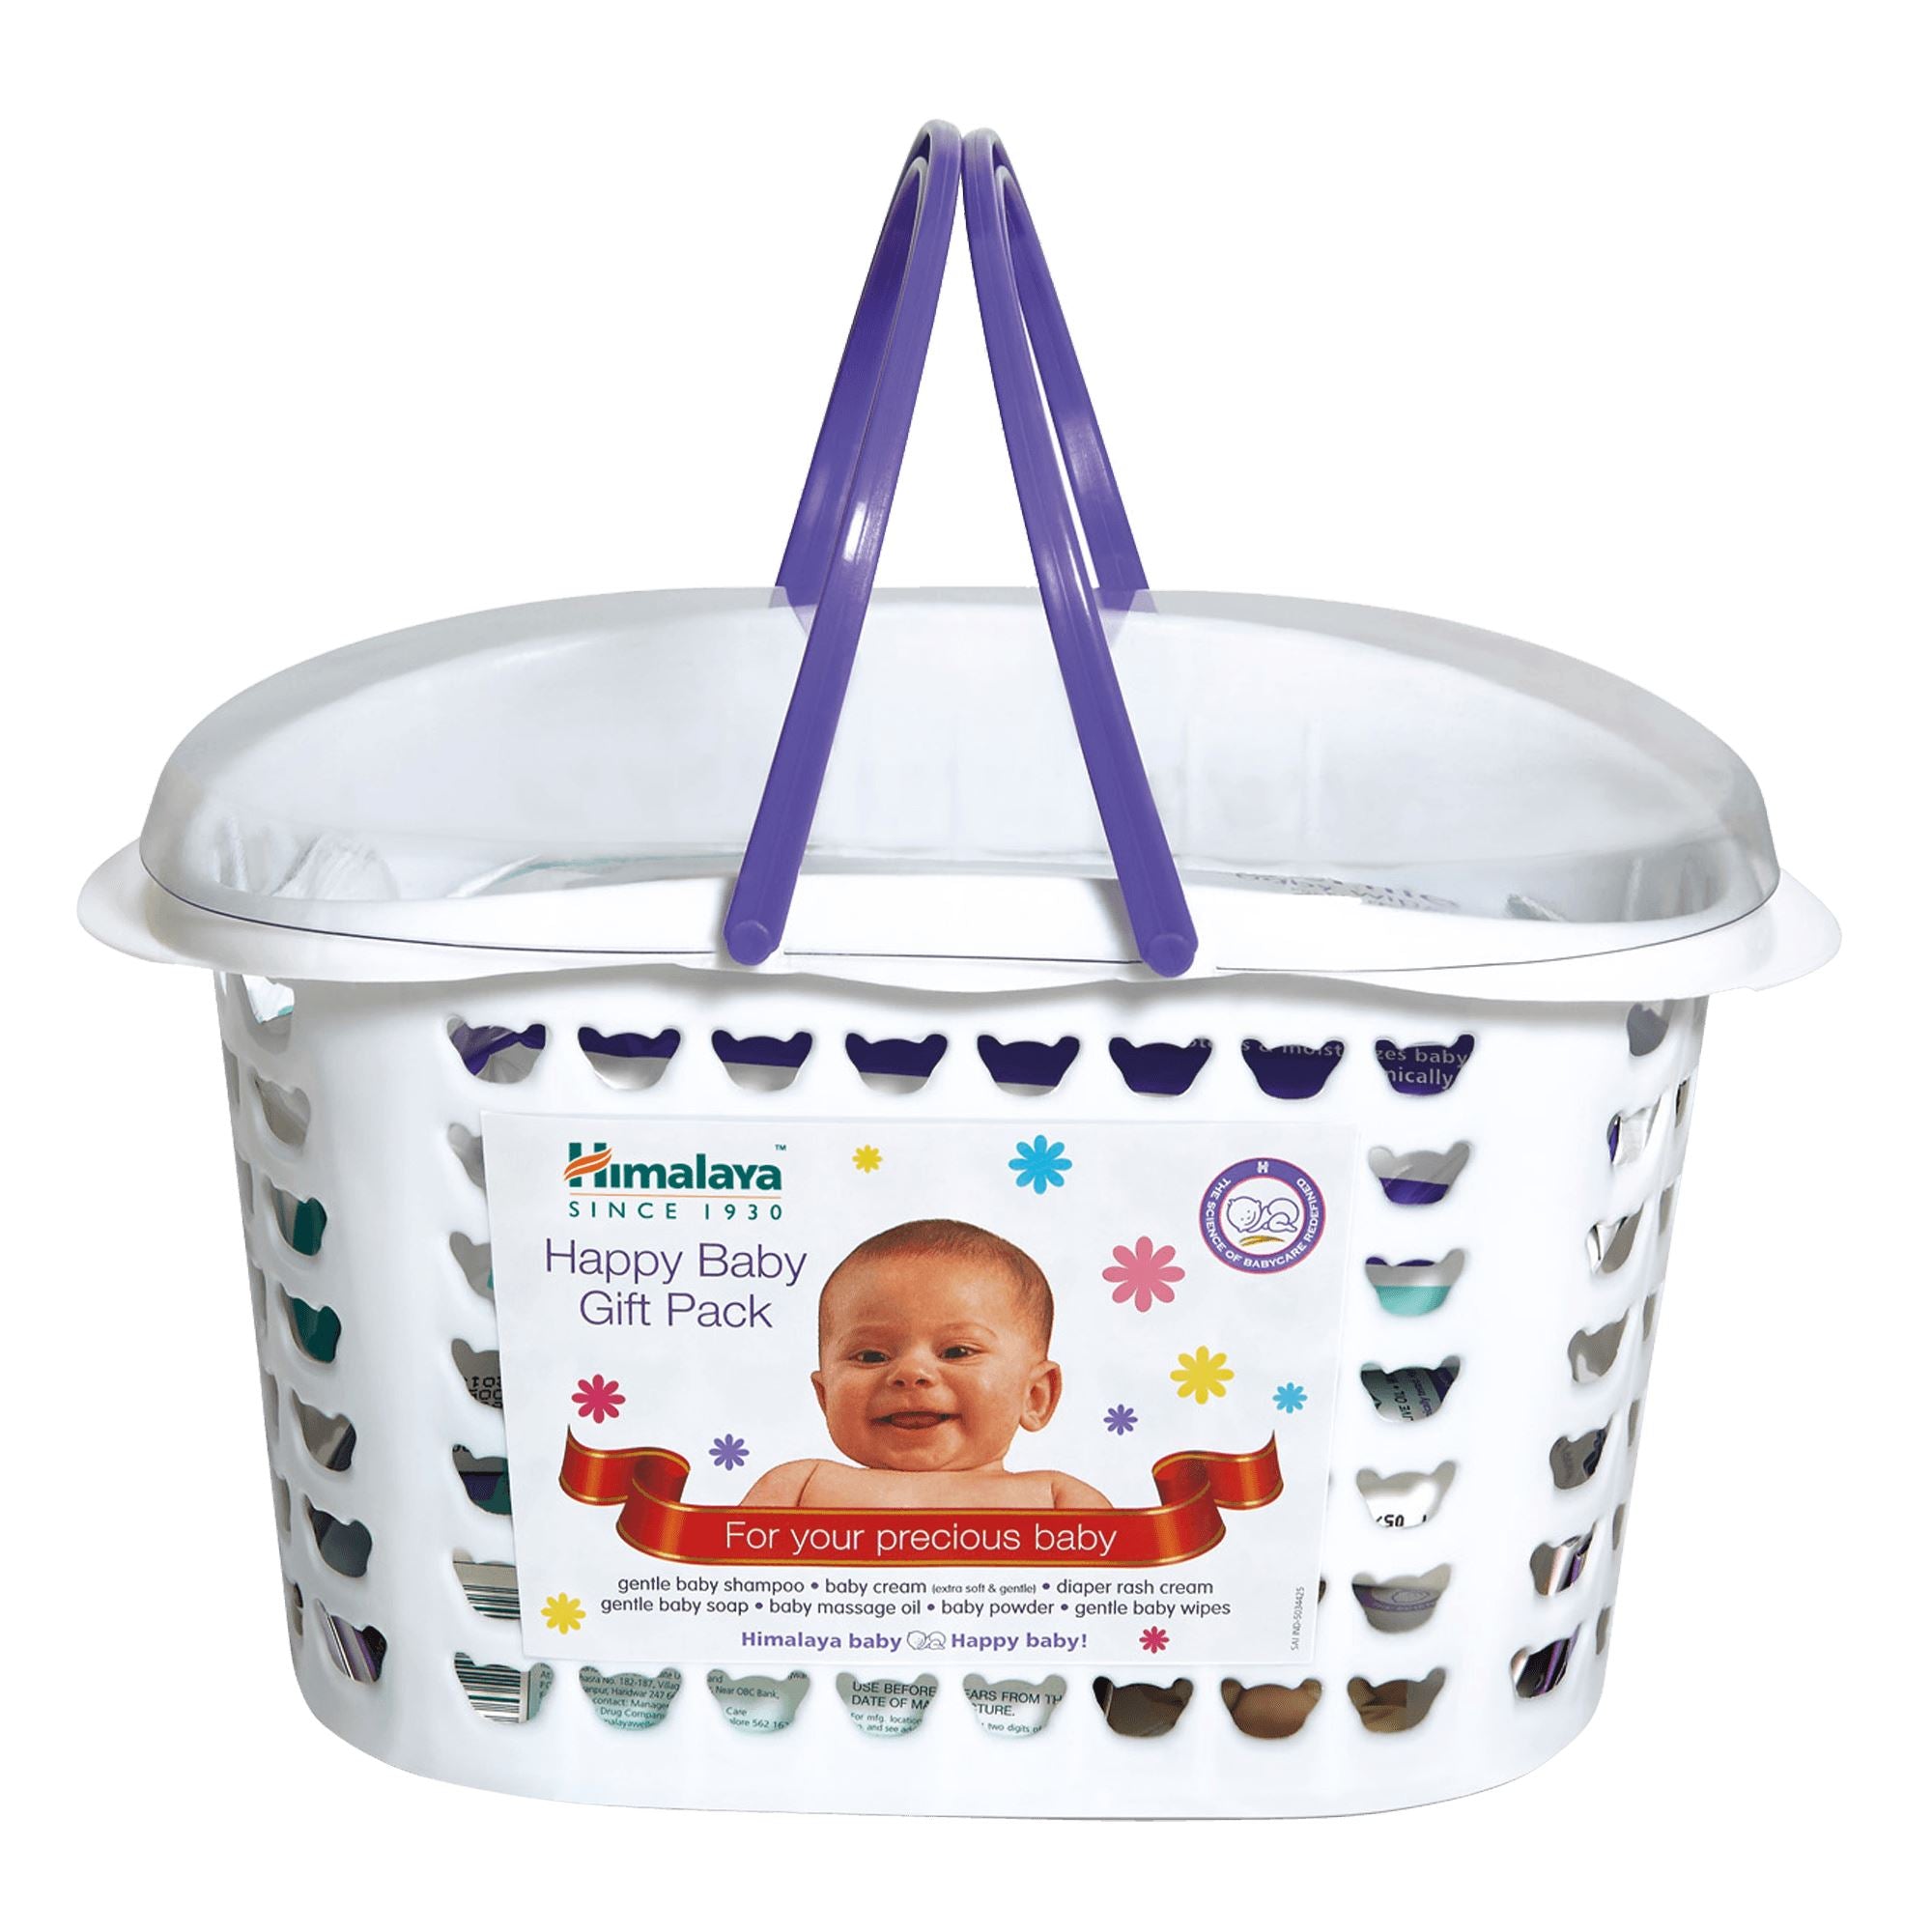 Buy Himalaya Happy Baby Gift Pack 1 Pc Online At Best Price of Rs 1190.4 -  bigbasket